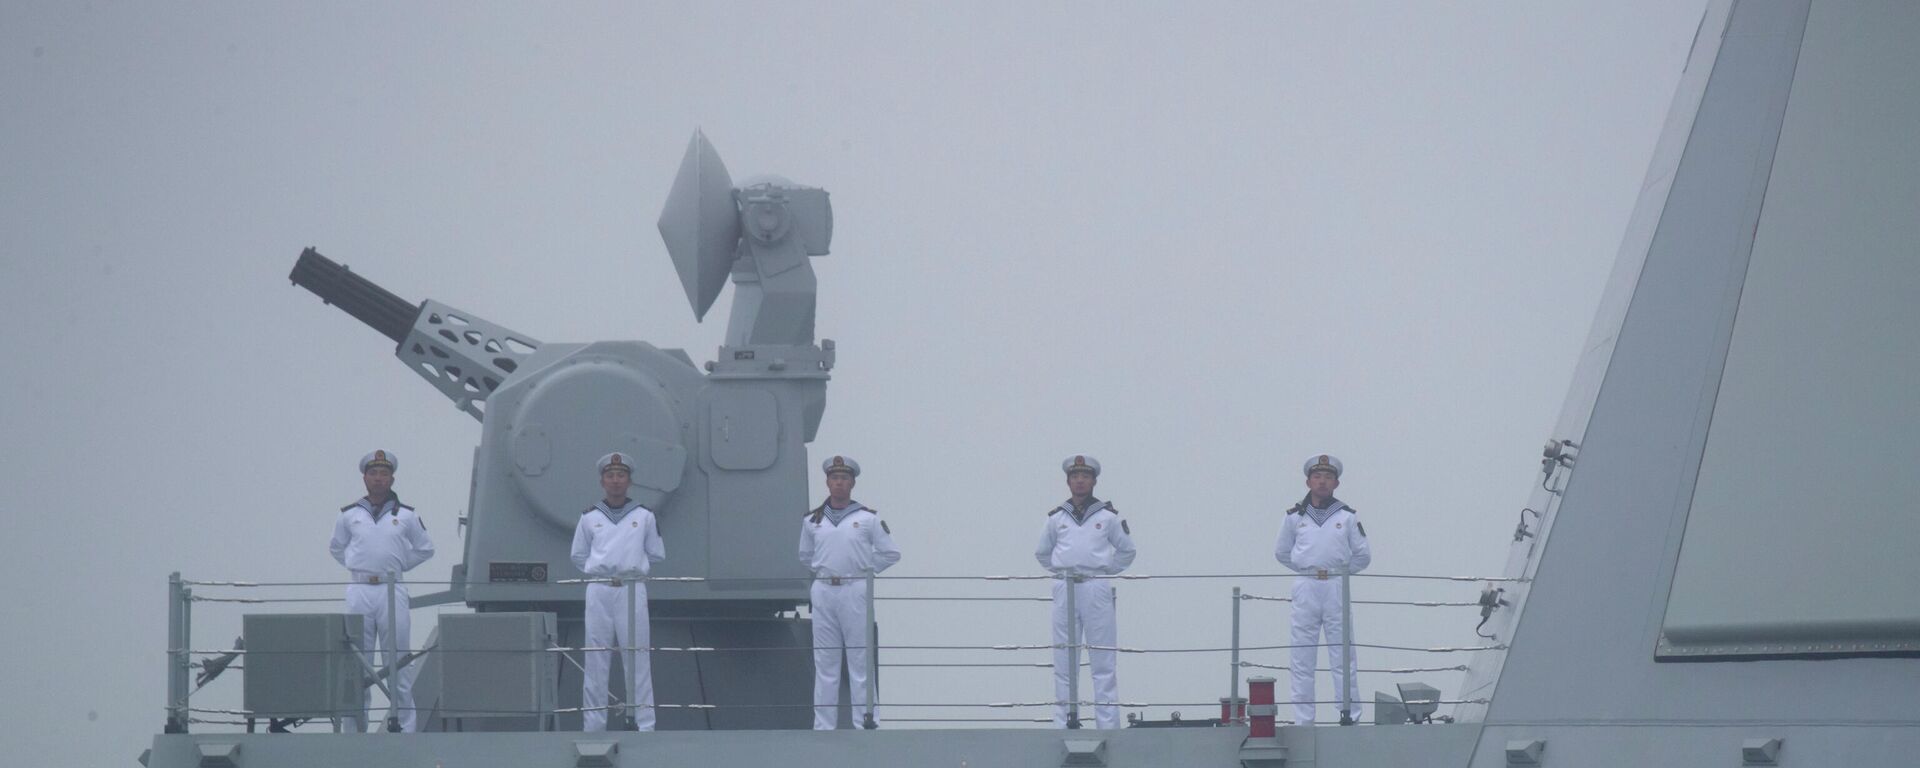 Sailors stand on the deck of the new type 055 guided-missile destroyer Nanchang of the Chinese People's Liberation Army (PLA) Navy as it participates in a naval parade to commemorate the 70th anniversary of the founding of China's PLA Navy in the sea near Qingdao in eastern China's Shandong province, Tuesday, April 23, 2019 - Sputnik International, 1920, 08.07.2022